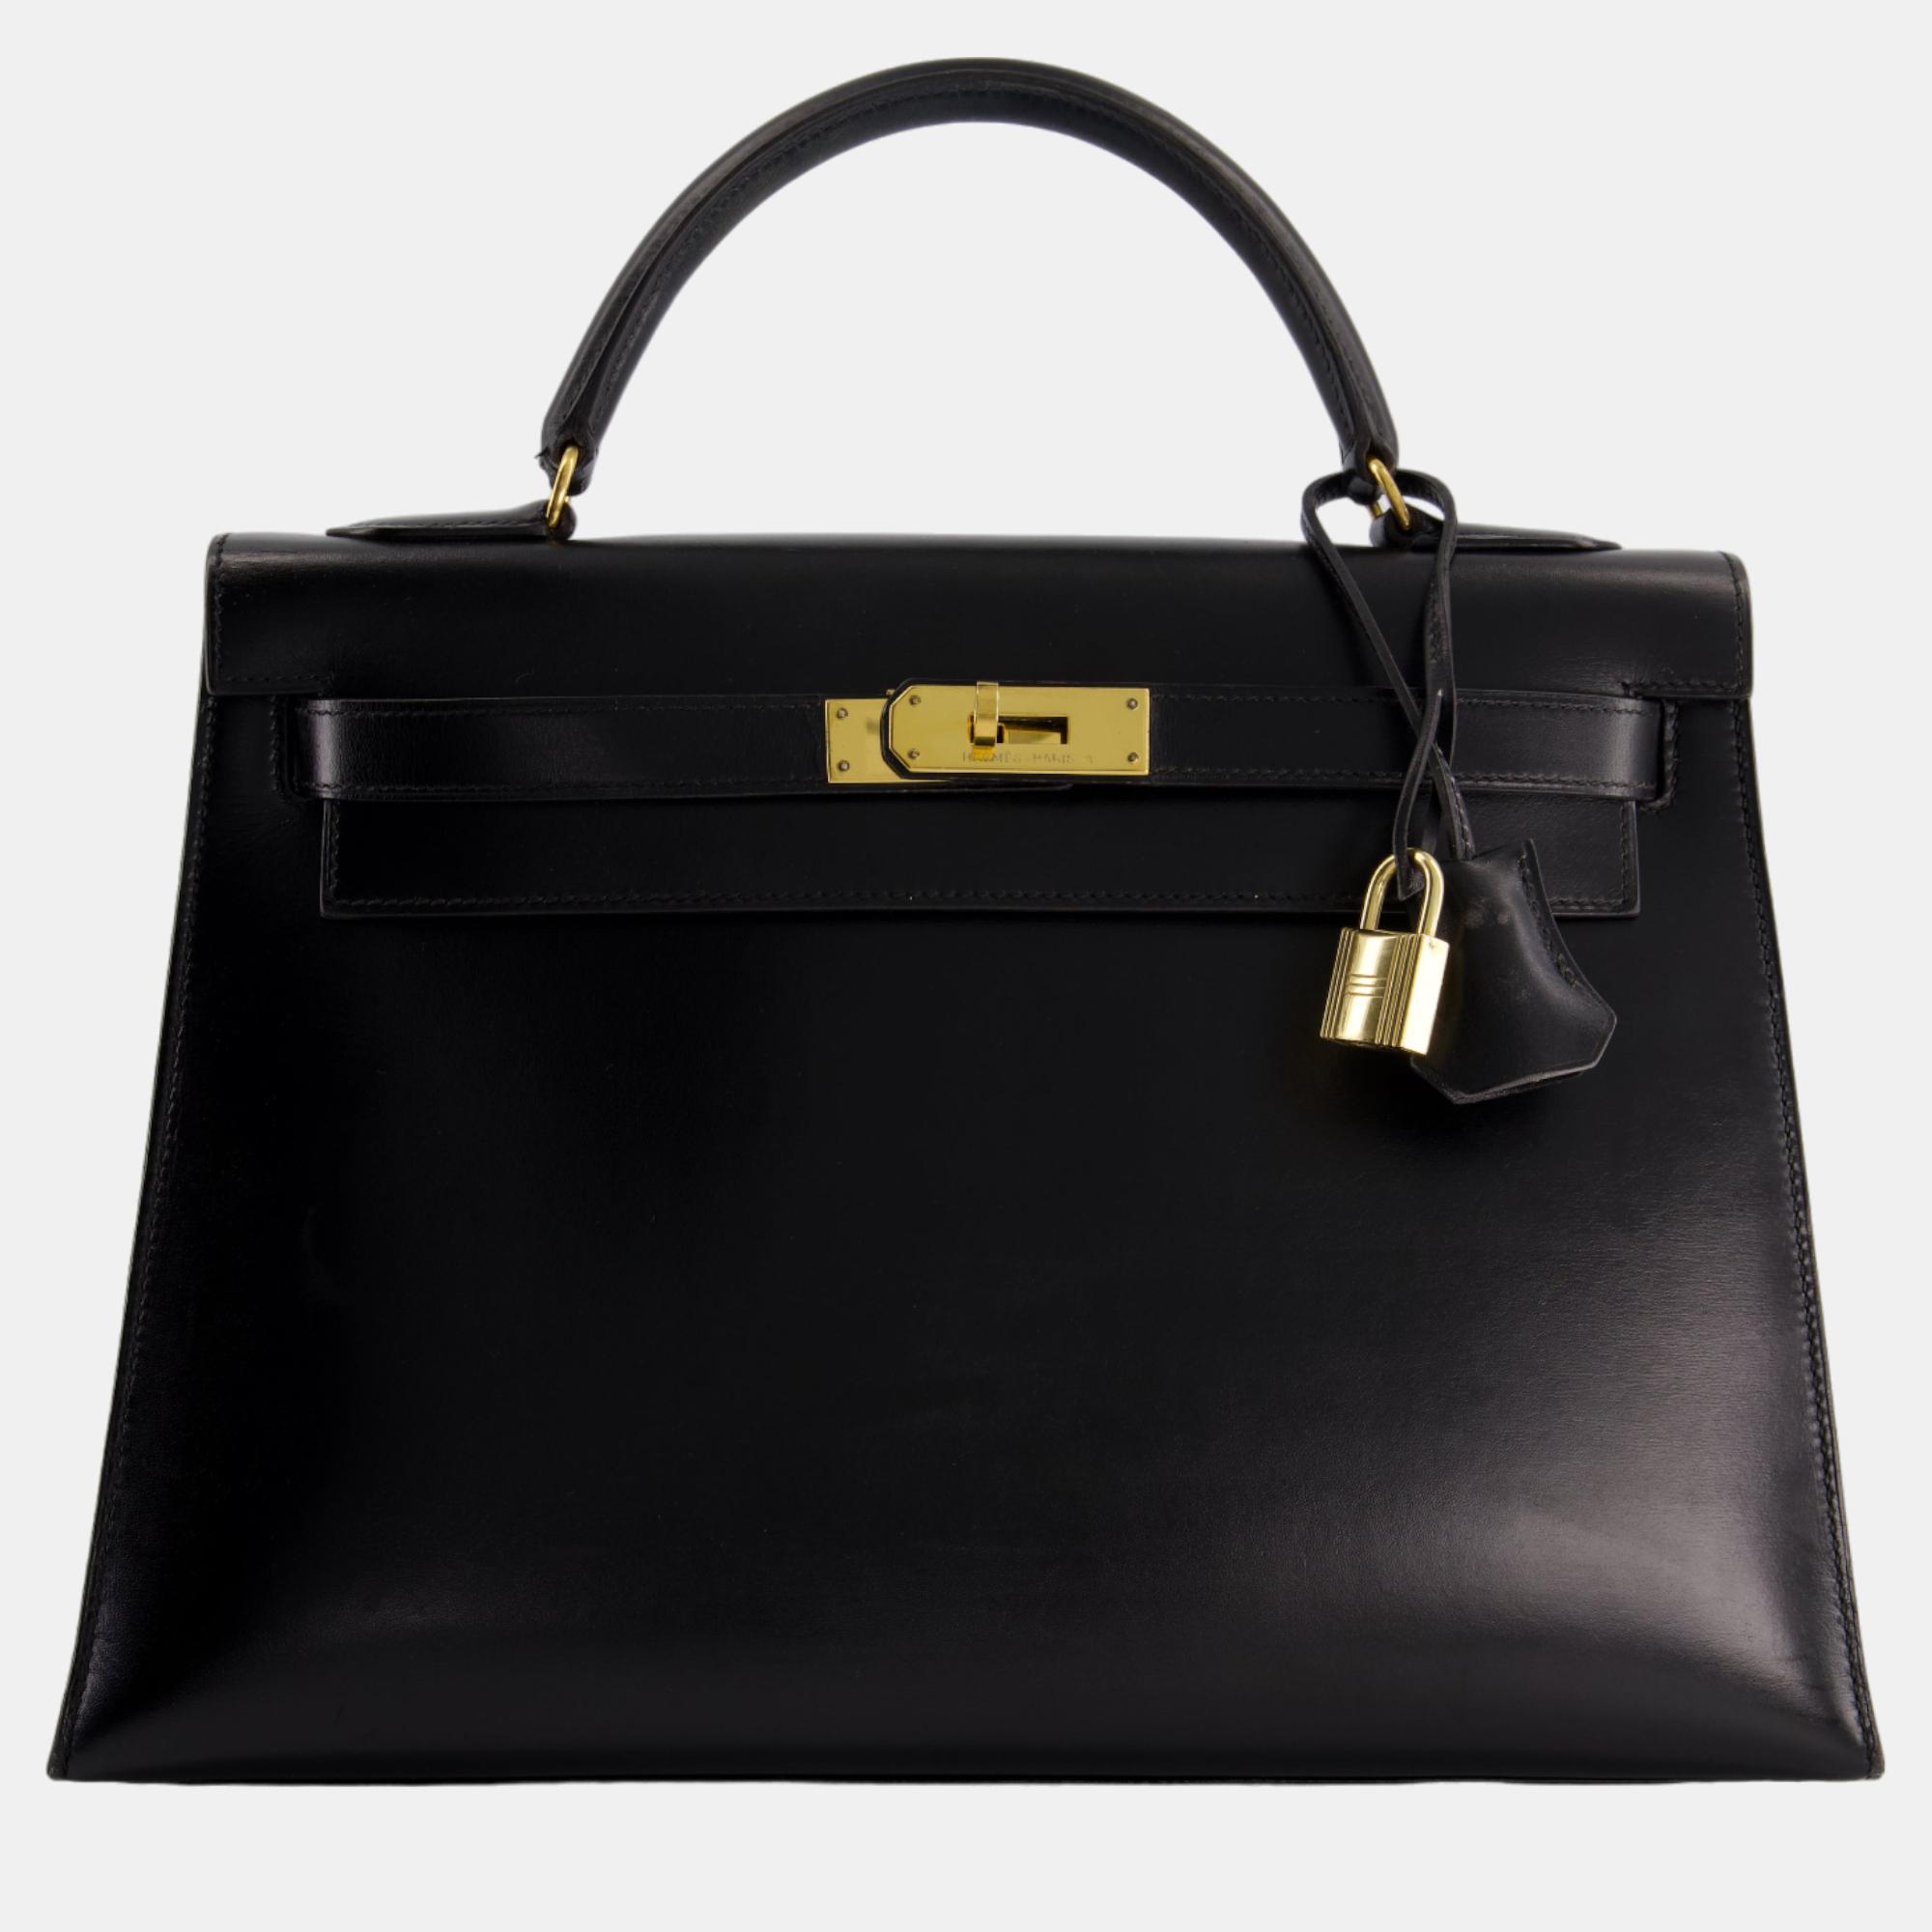 Hermes Vintage Kelly 32cm Sellier In Black Box Calf Leather With Gold Hardware